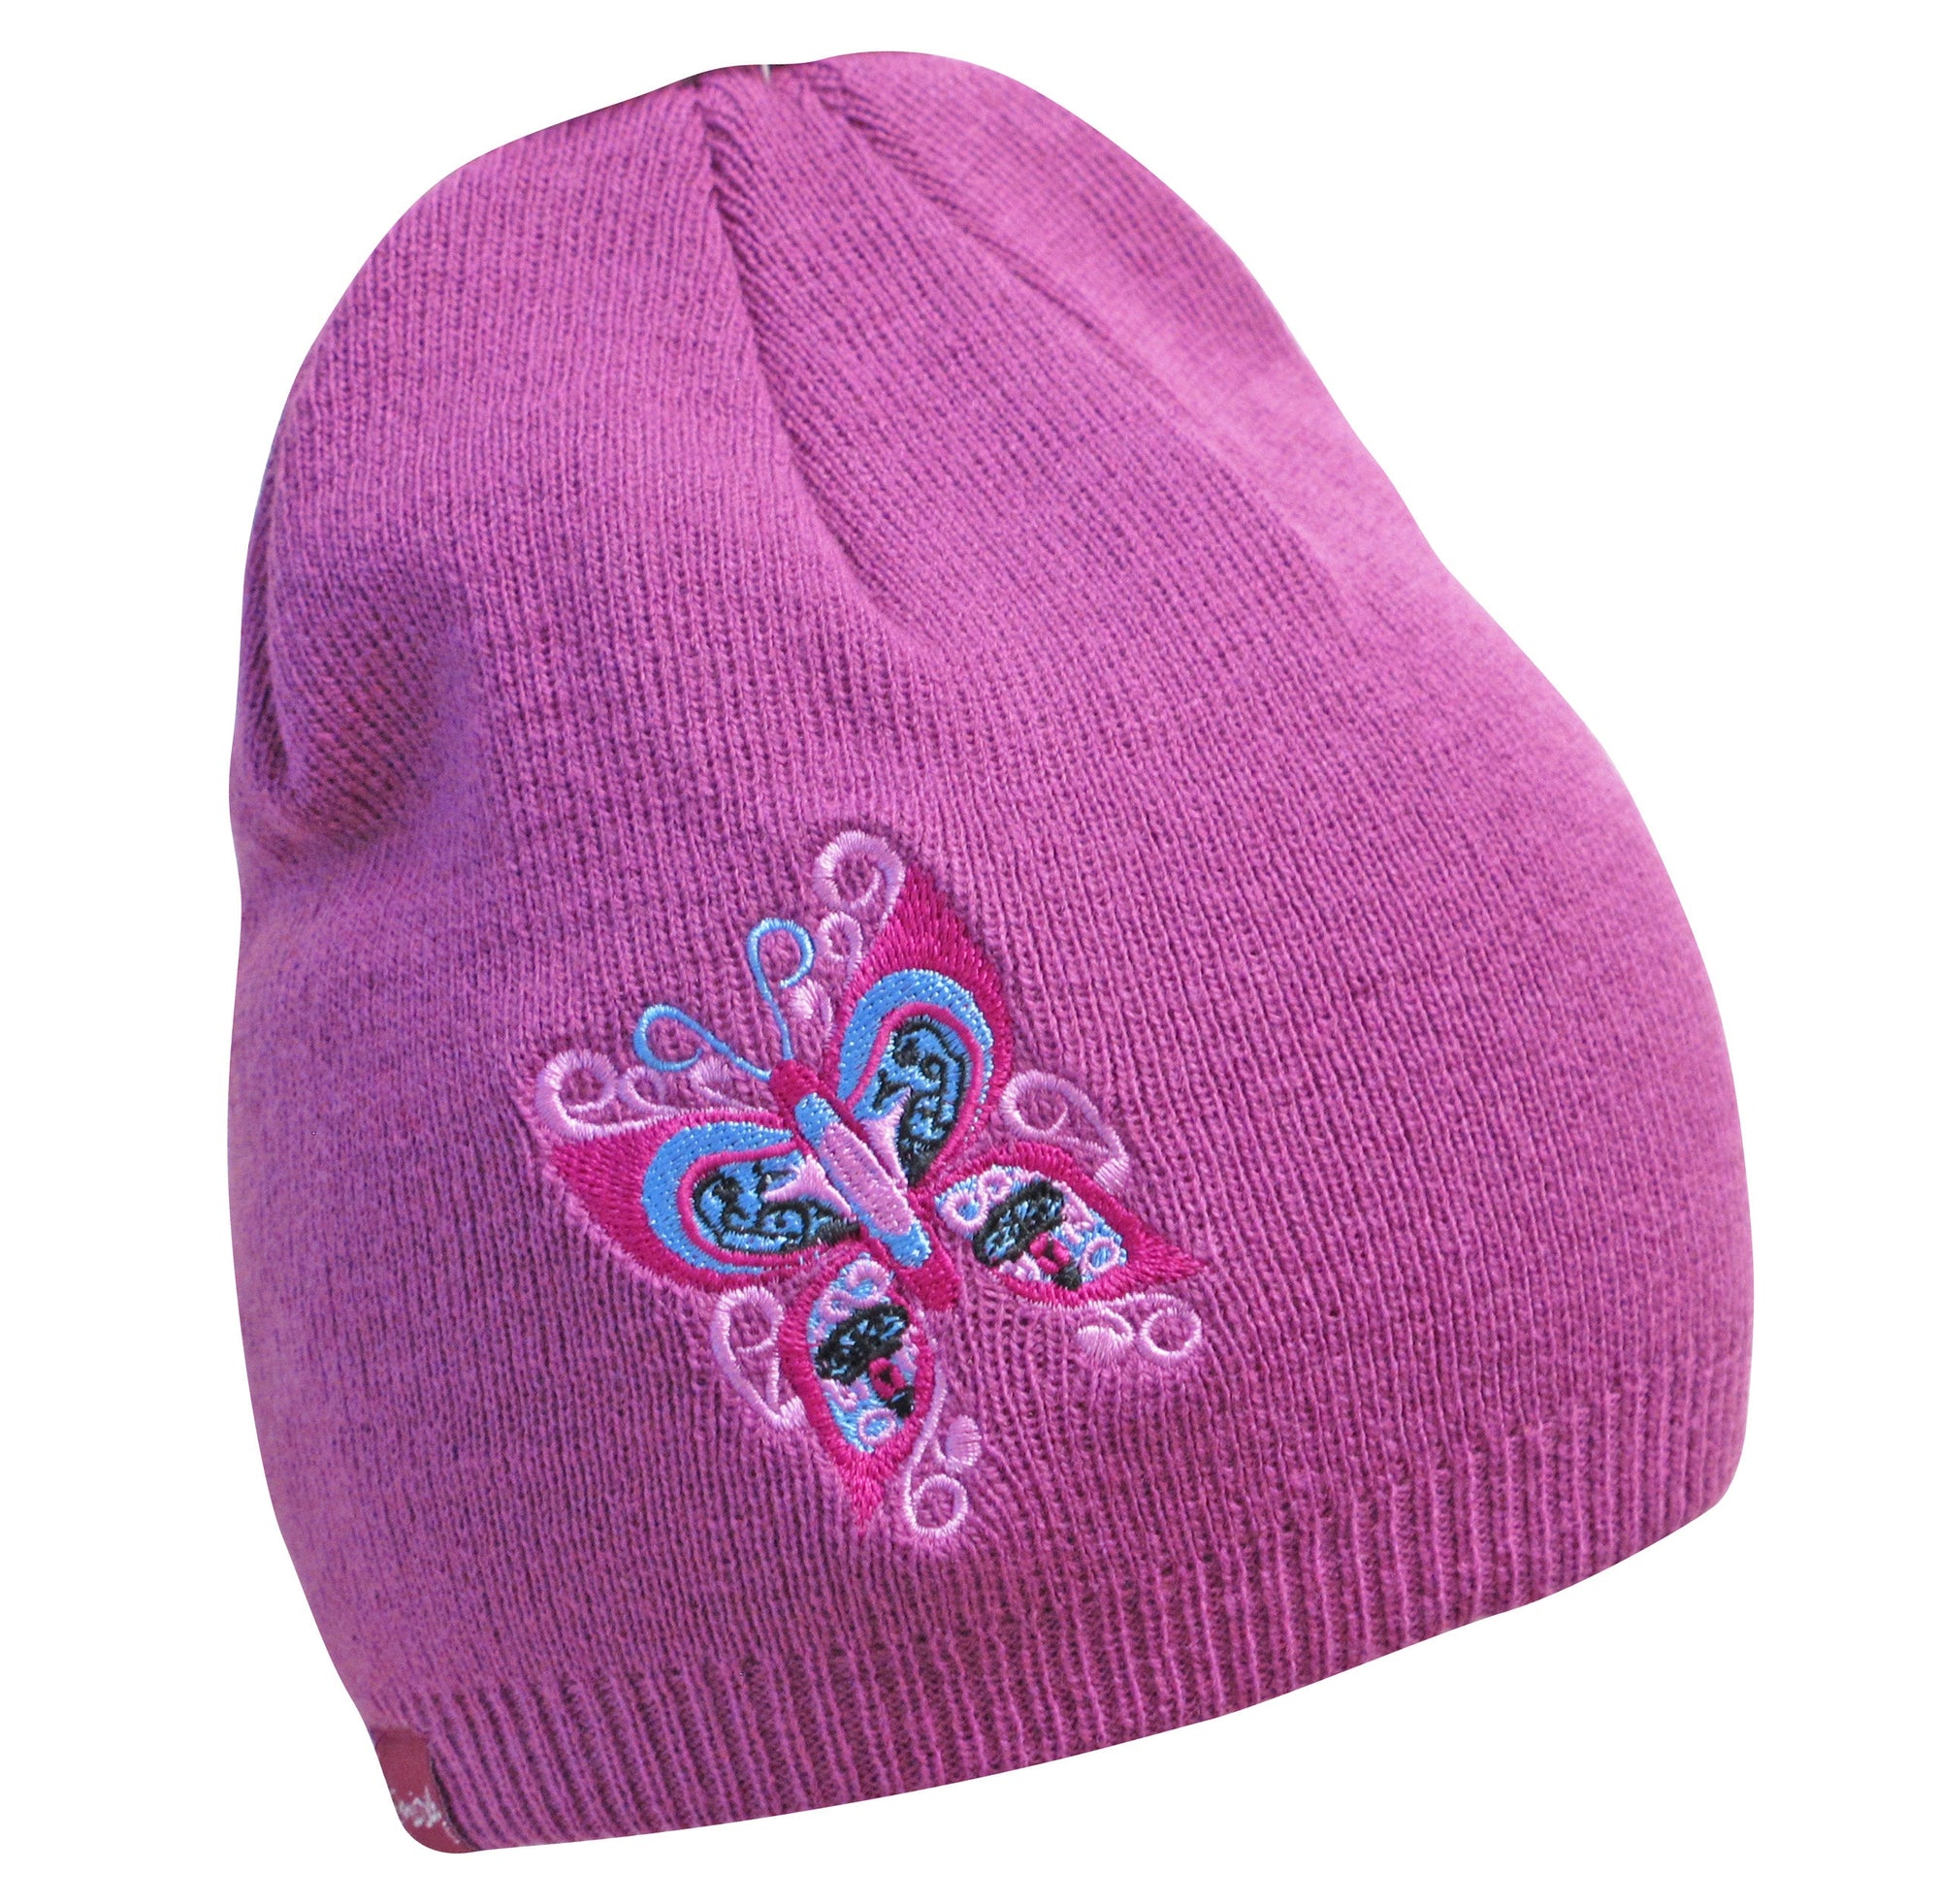 Embroidered Knitted Hat Francis Dick Butterfly - Embroidered Knitted Hat Francis Dick Butterfly -  - House of Himwitsa Native Art Gallery and Gifts